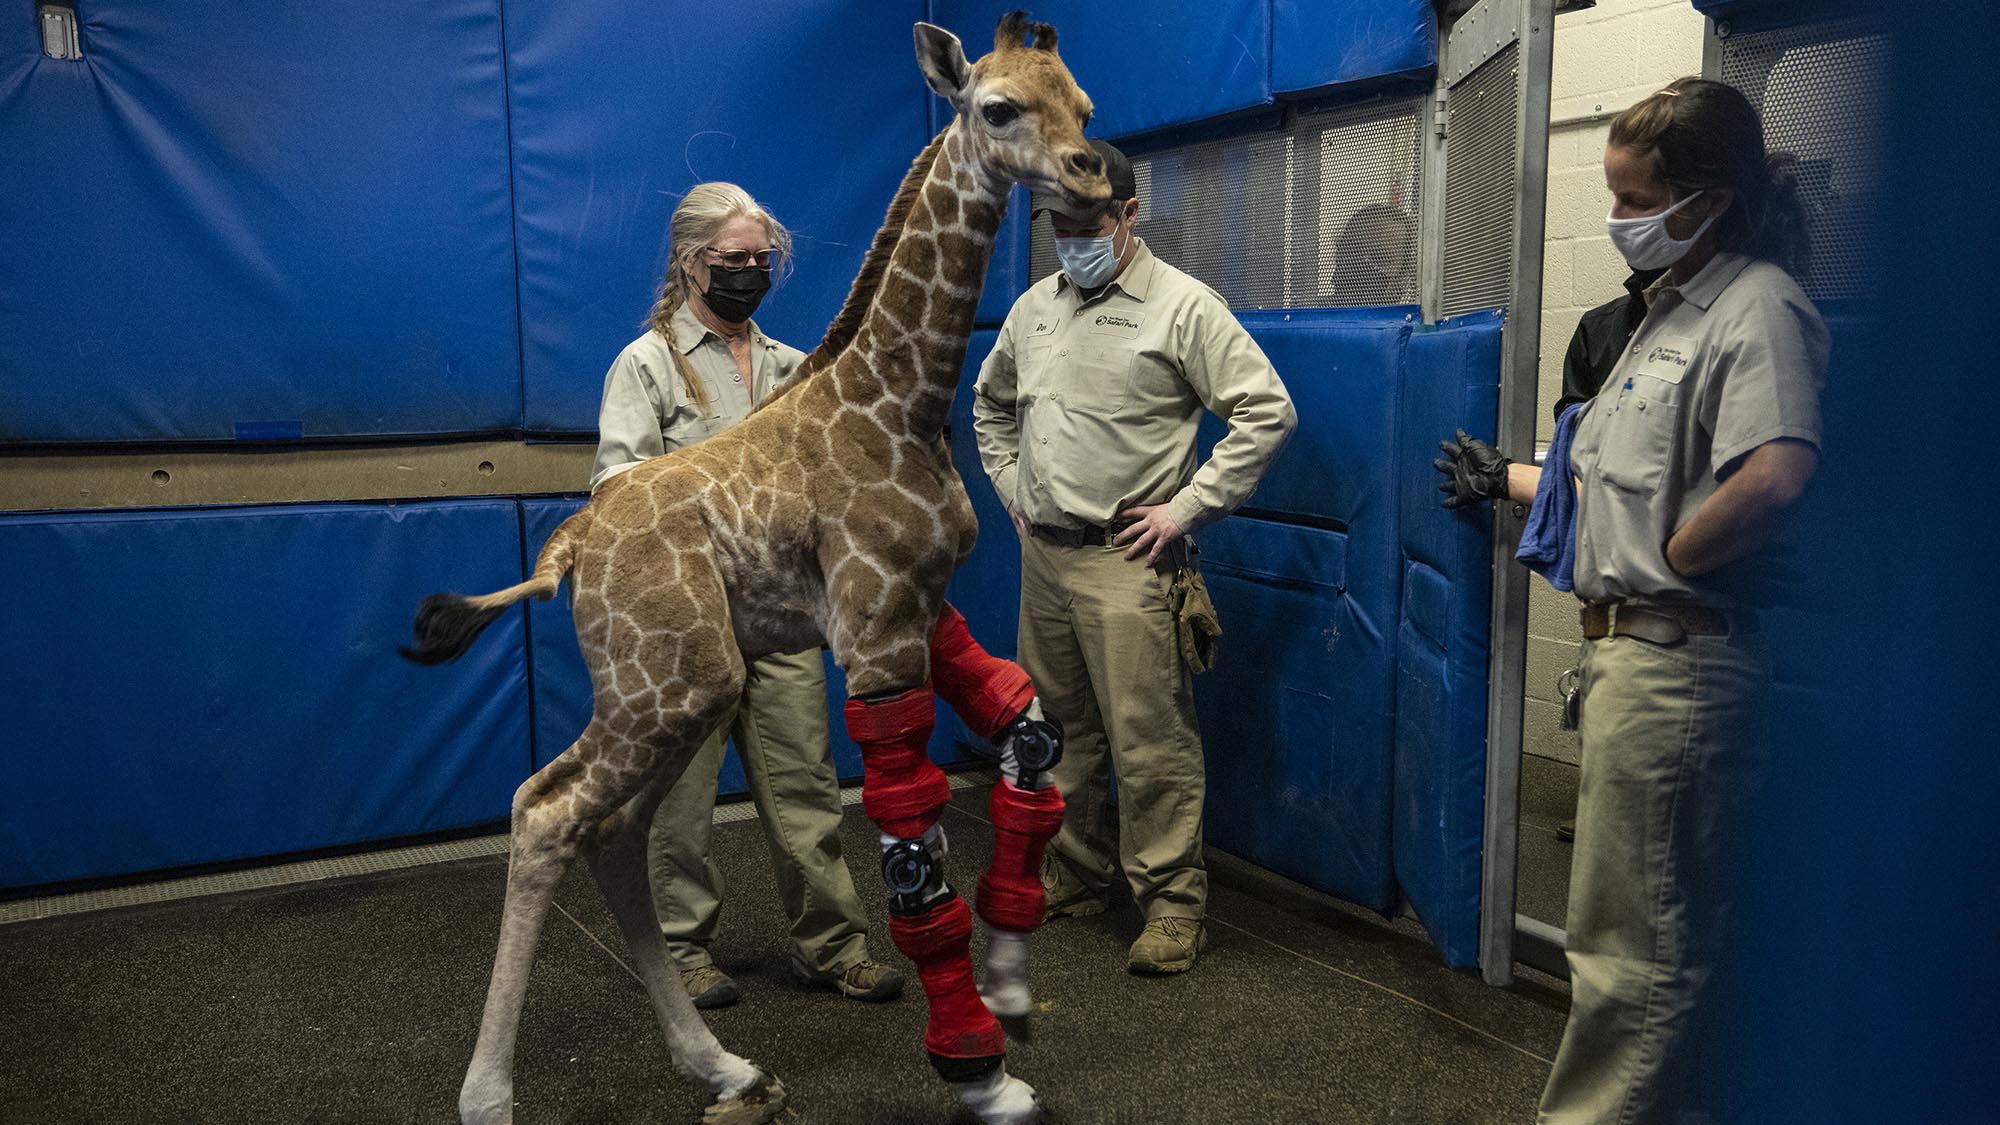 Read more about the article Giraffe Calf Waking Tall After Hi Tech Braces Cures Wonky Legs